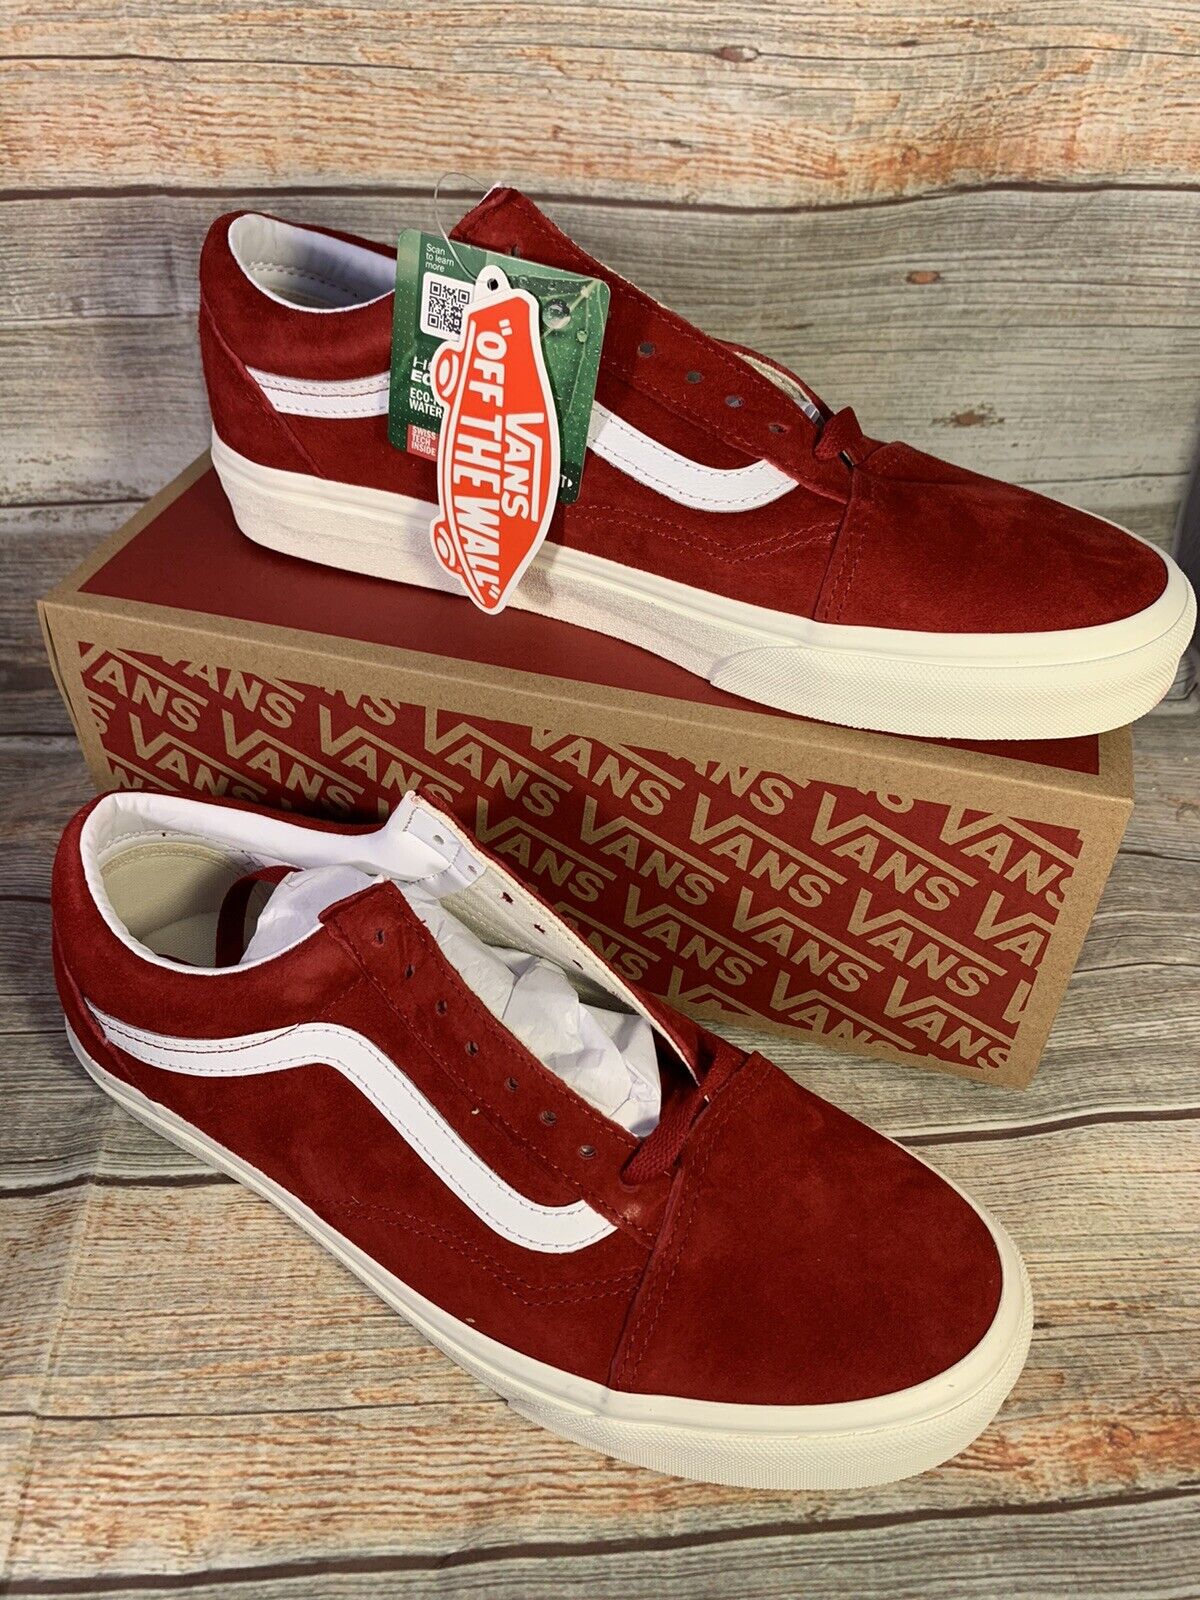 VANS Old Skool Suede Red Chili Shoes Sneaker 9 Size Men’s Cheap mail order sales Pepper Max 47% OFF